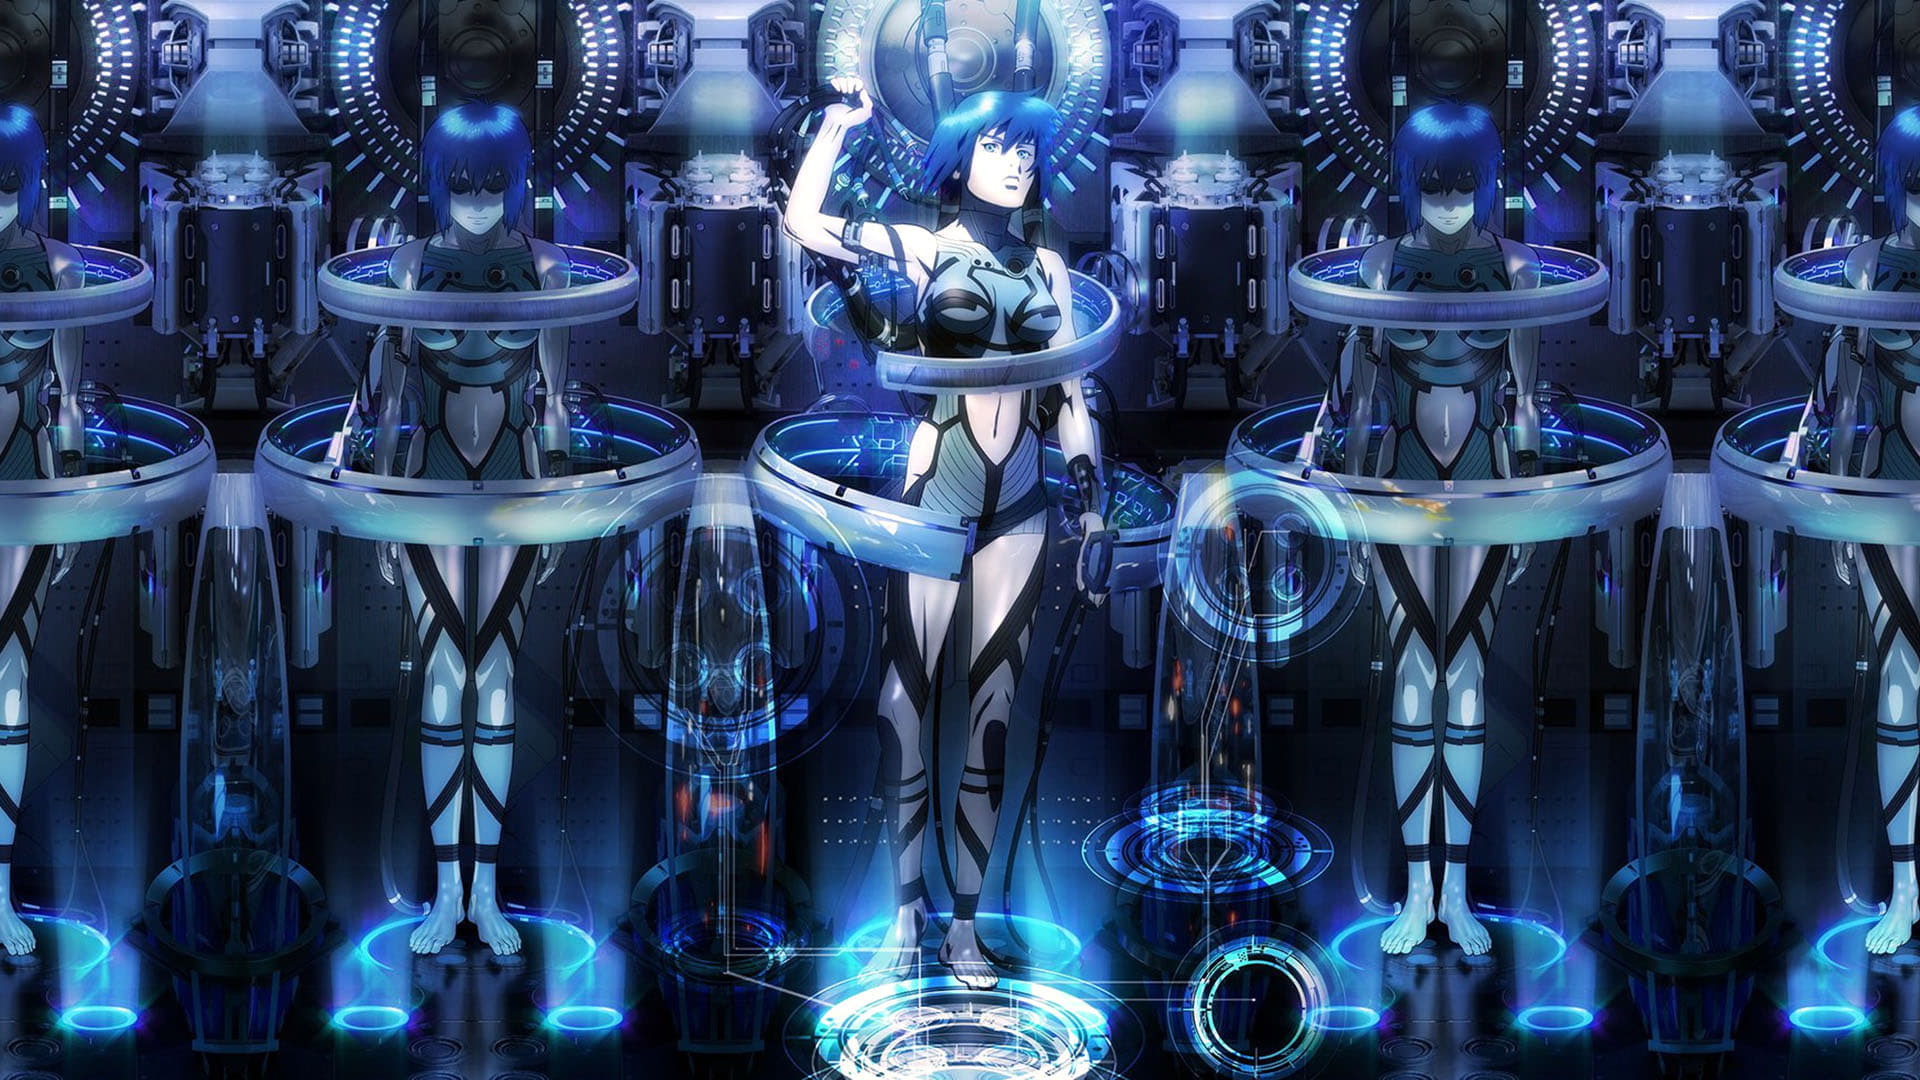 Poster Phim Vỏ Bọc Ma: Bộ Phim Mới (Ghost in the Shell: The New Movie)